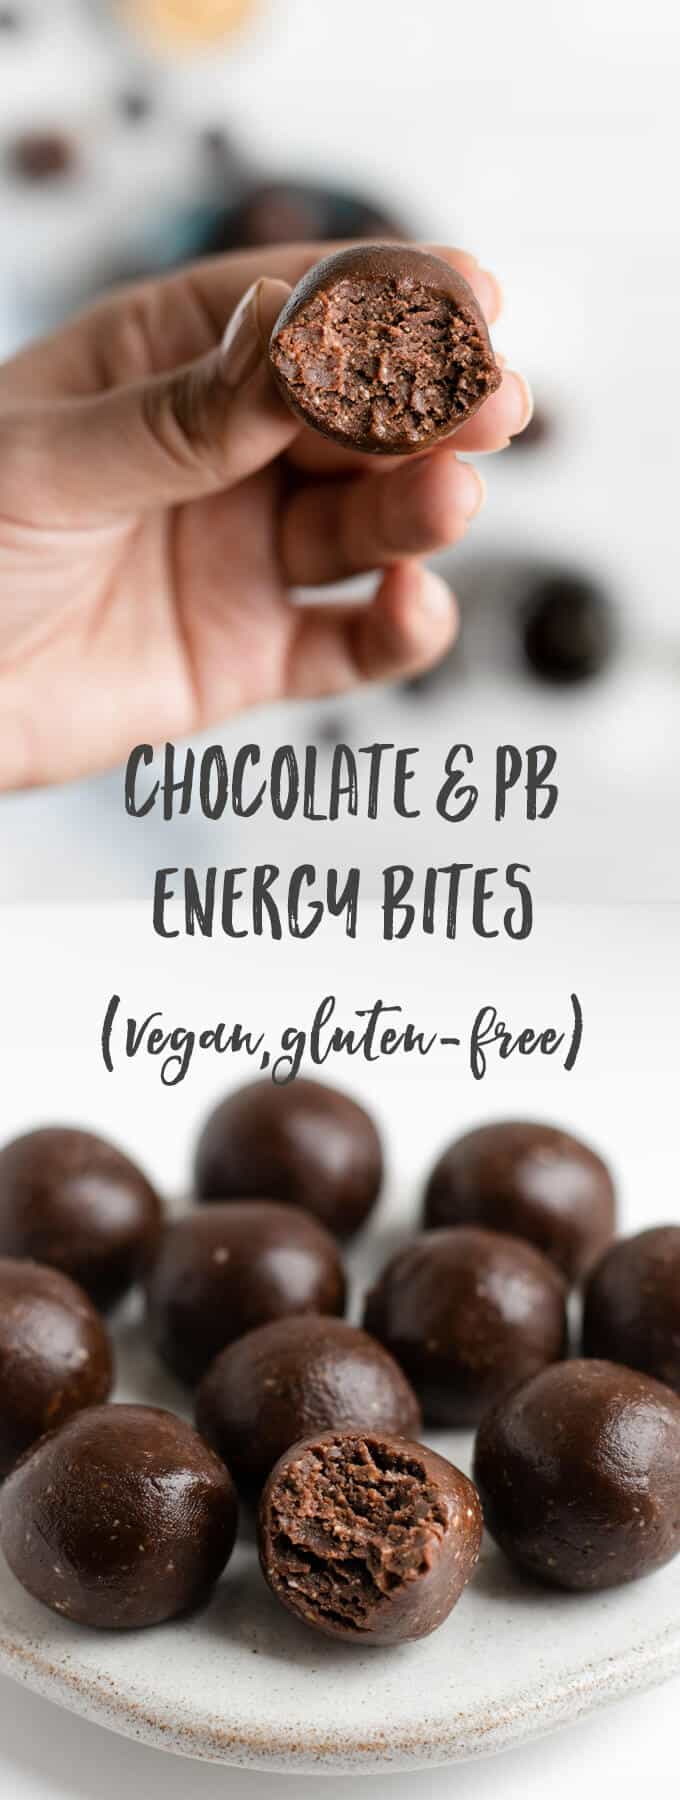 Chocolate and peanut butter energy bites! These are raw, made with only 5 ingredients and packed with protein! You will love these! #glutenfreerecipe #veganfood #rawtreats | via @annabanana.co